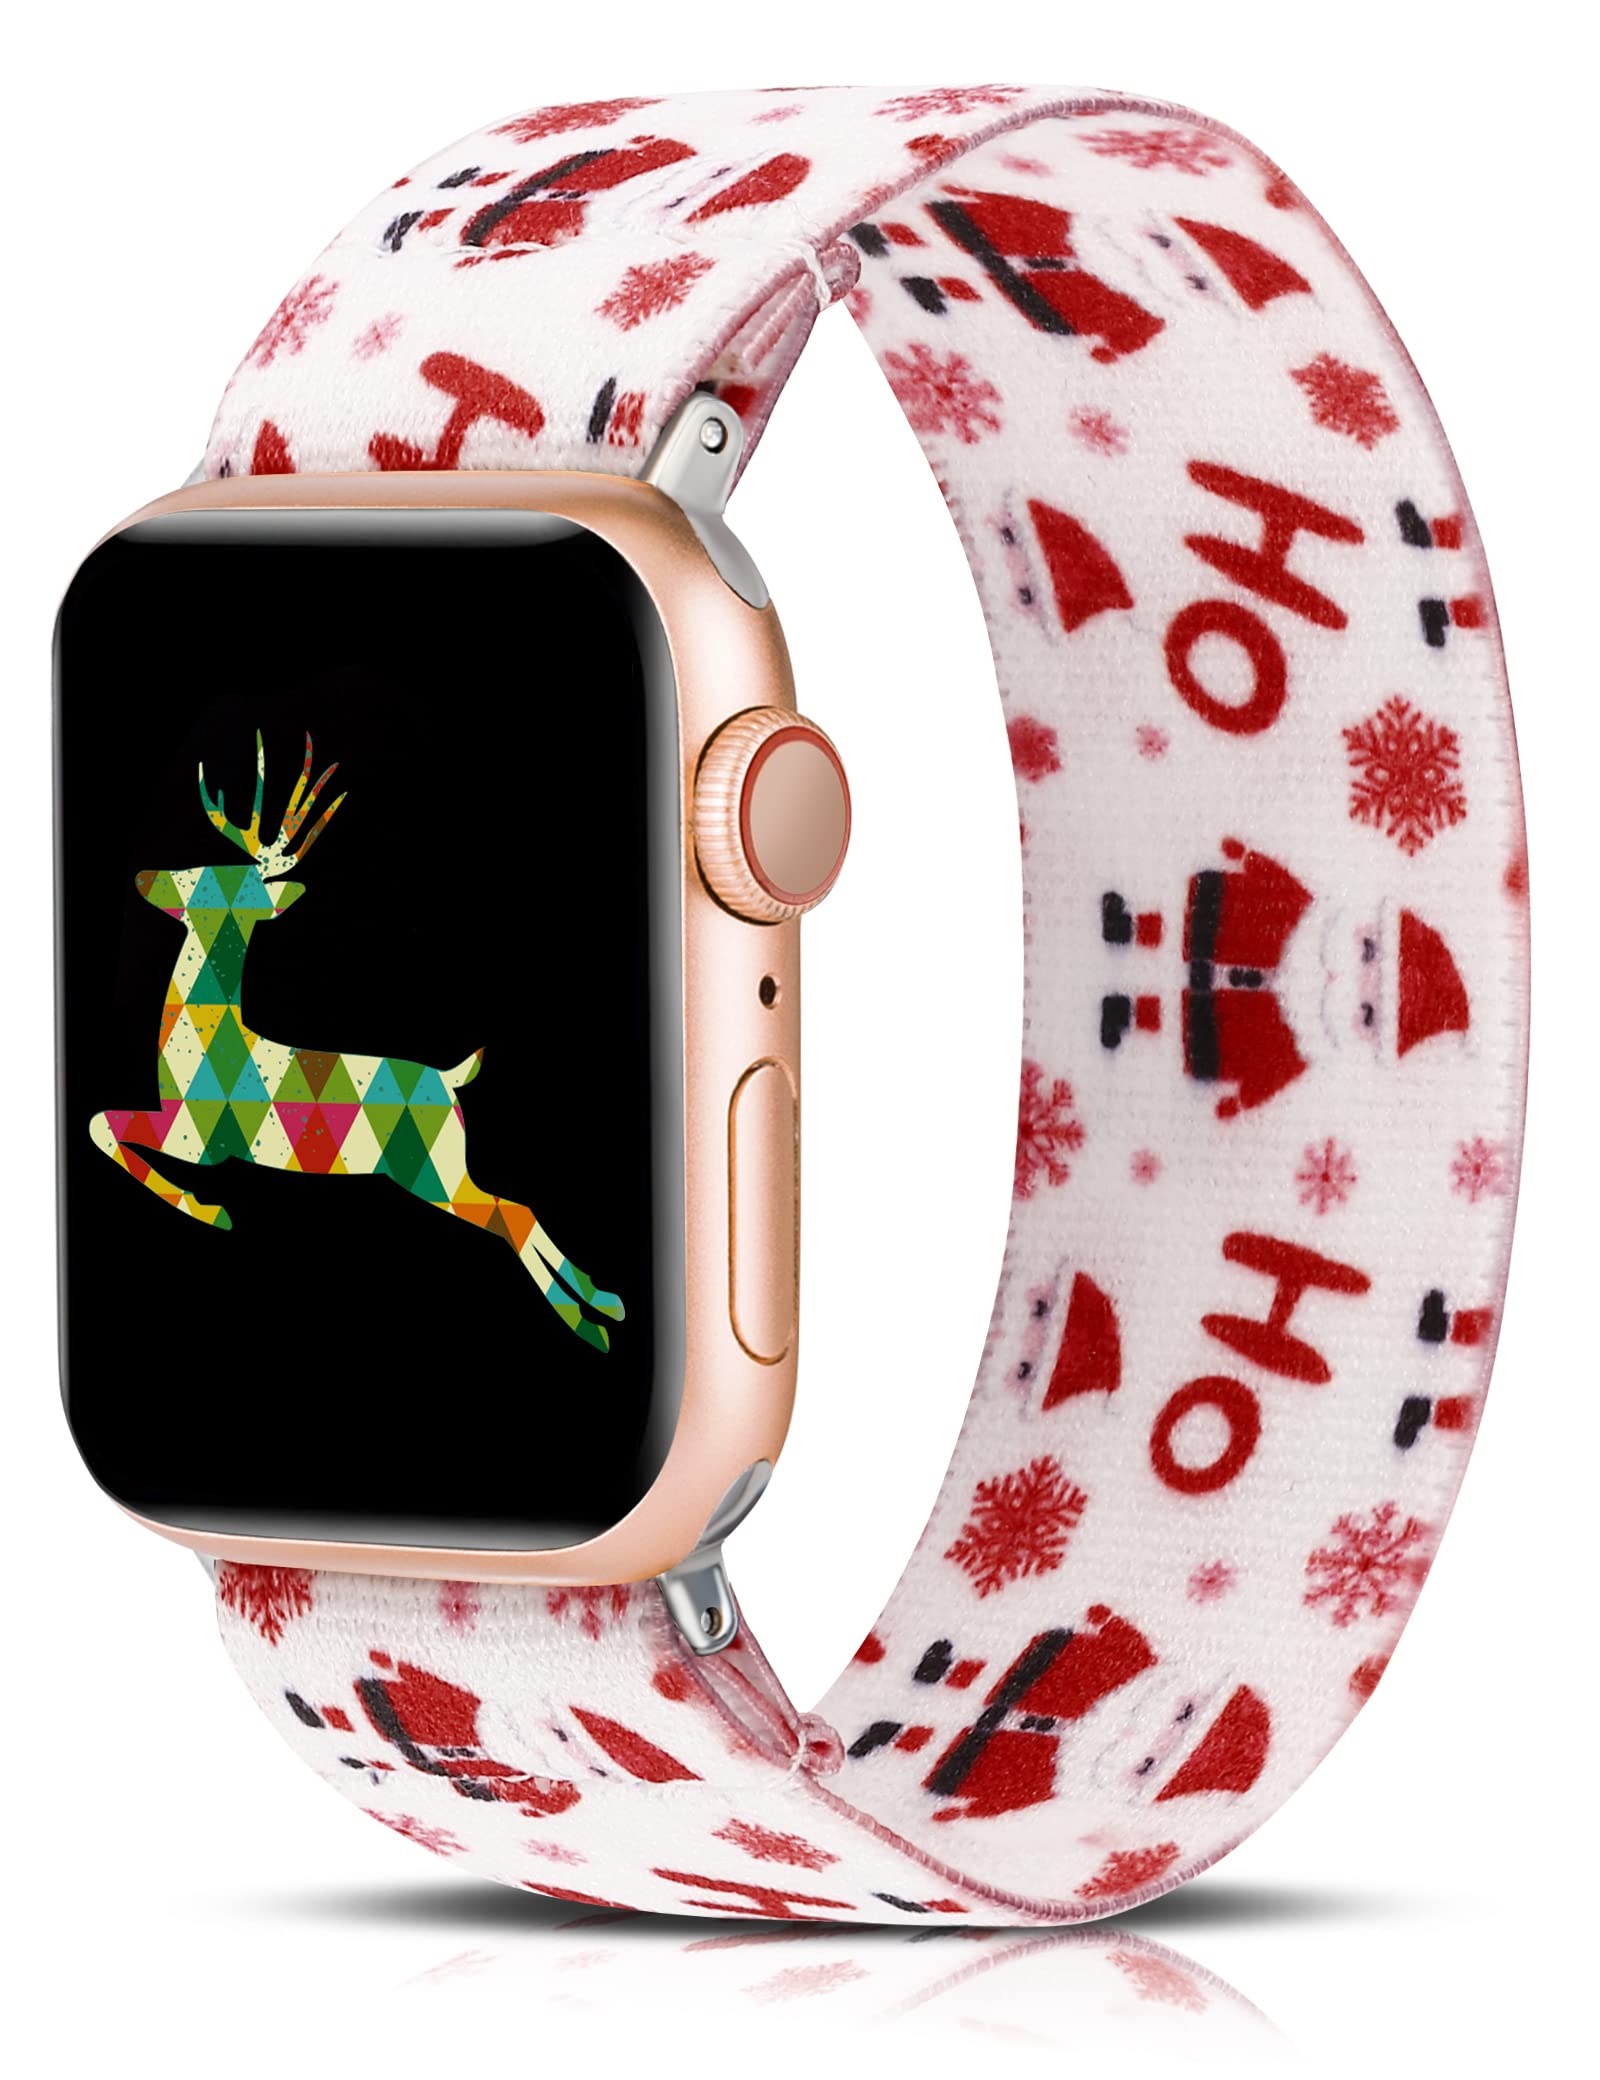 Doo UC Halloween Floral Watch Bands Compatible with Apple Watch 38mm/40mm/41mm, Halloween Pumpkin Silicone Fadeless Pattern Printed Replacement Bands